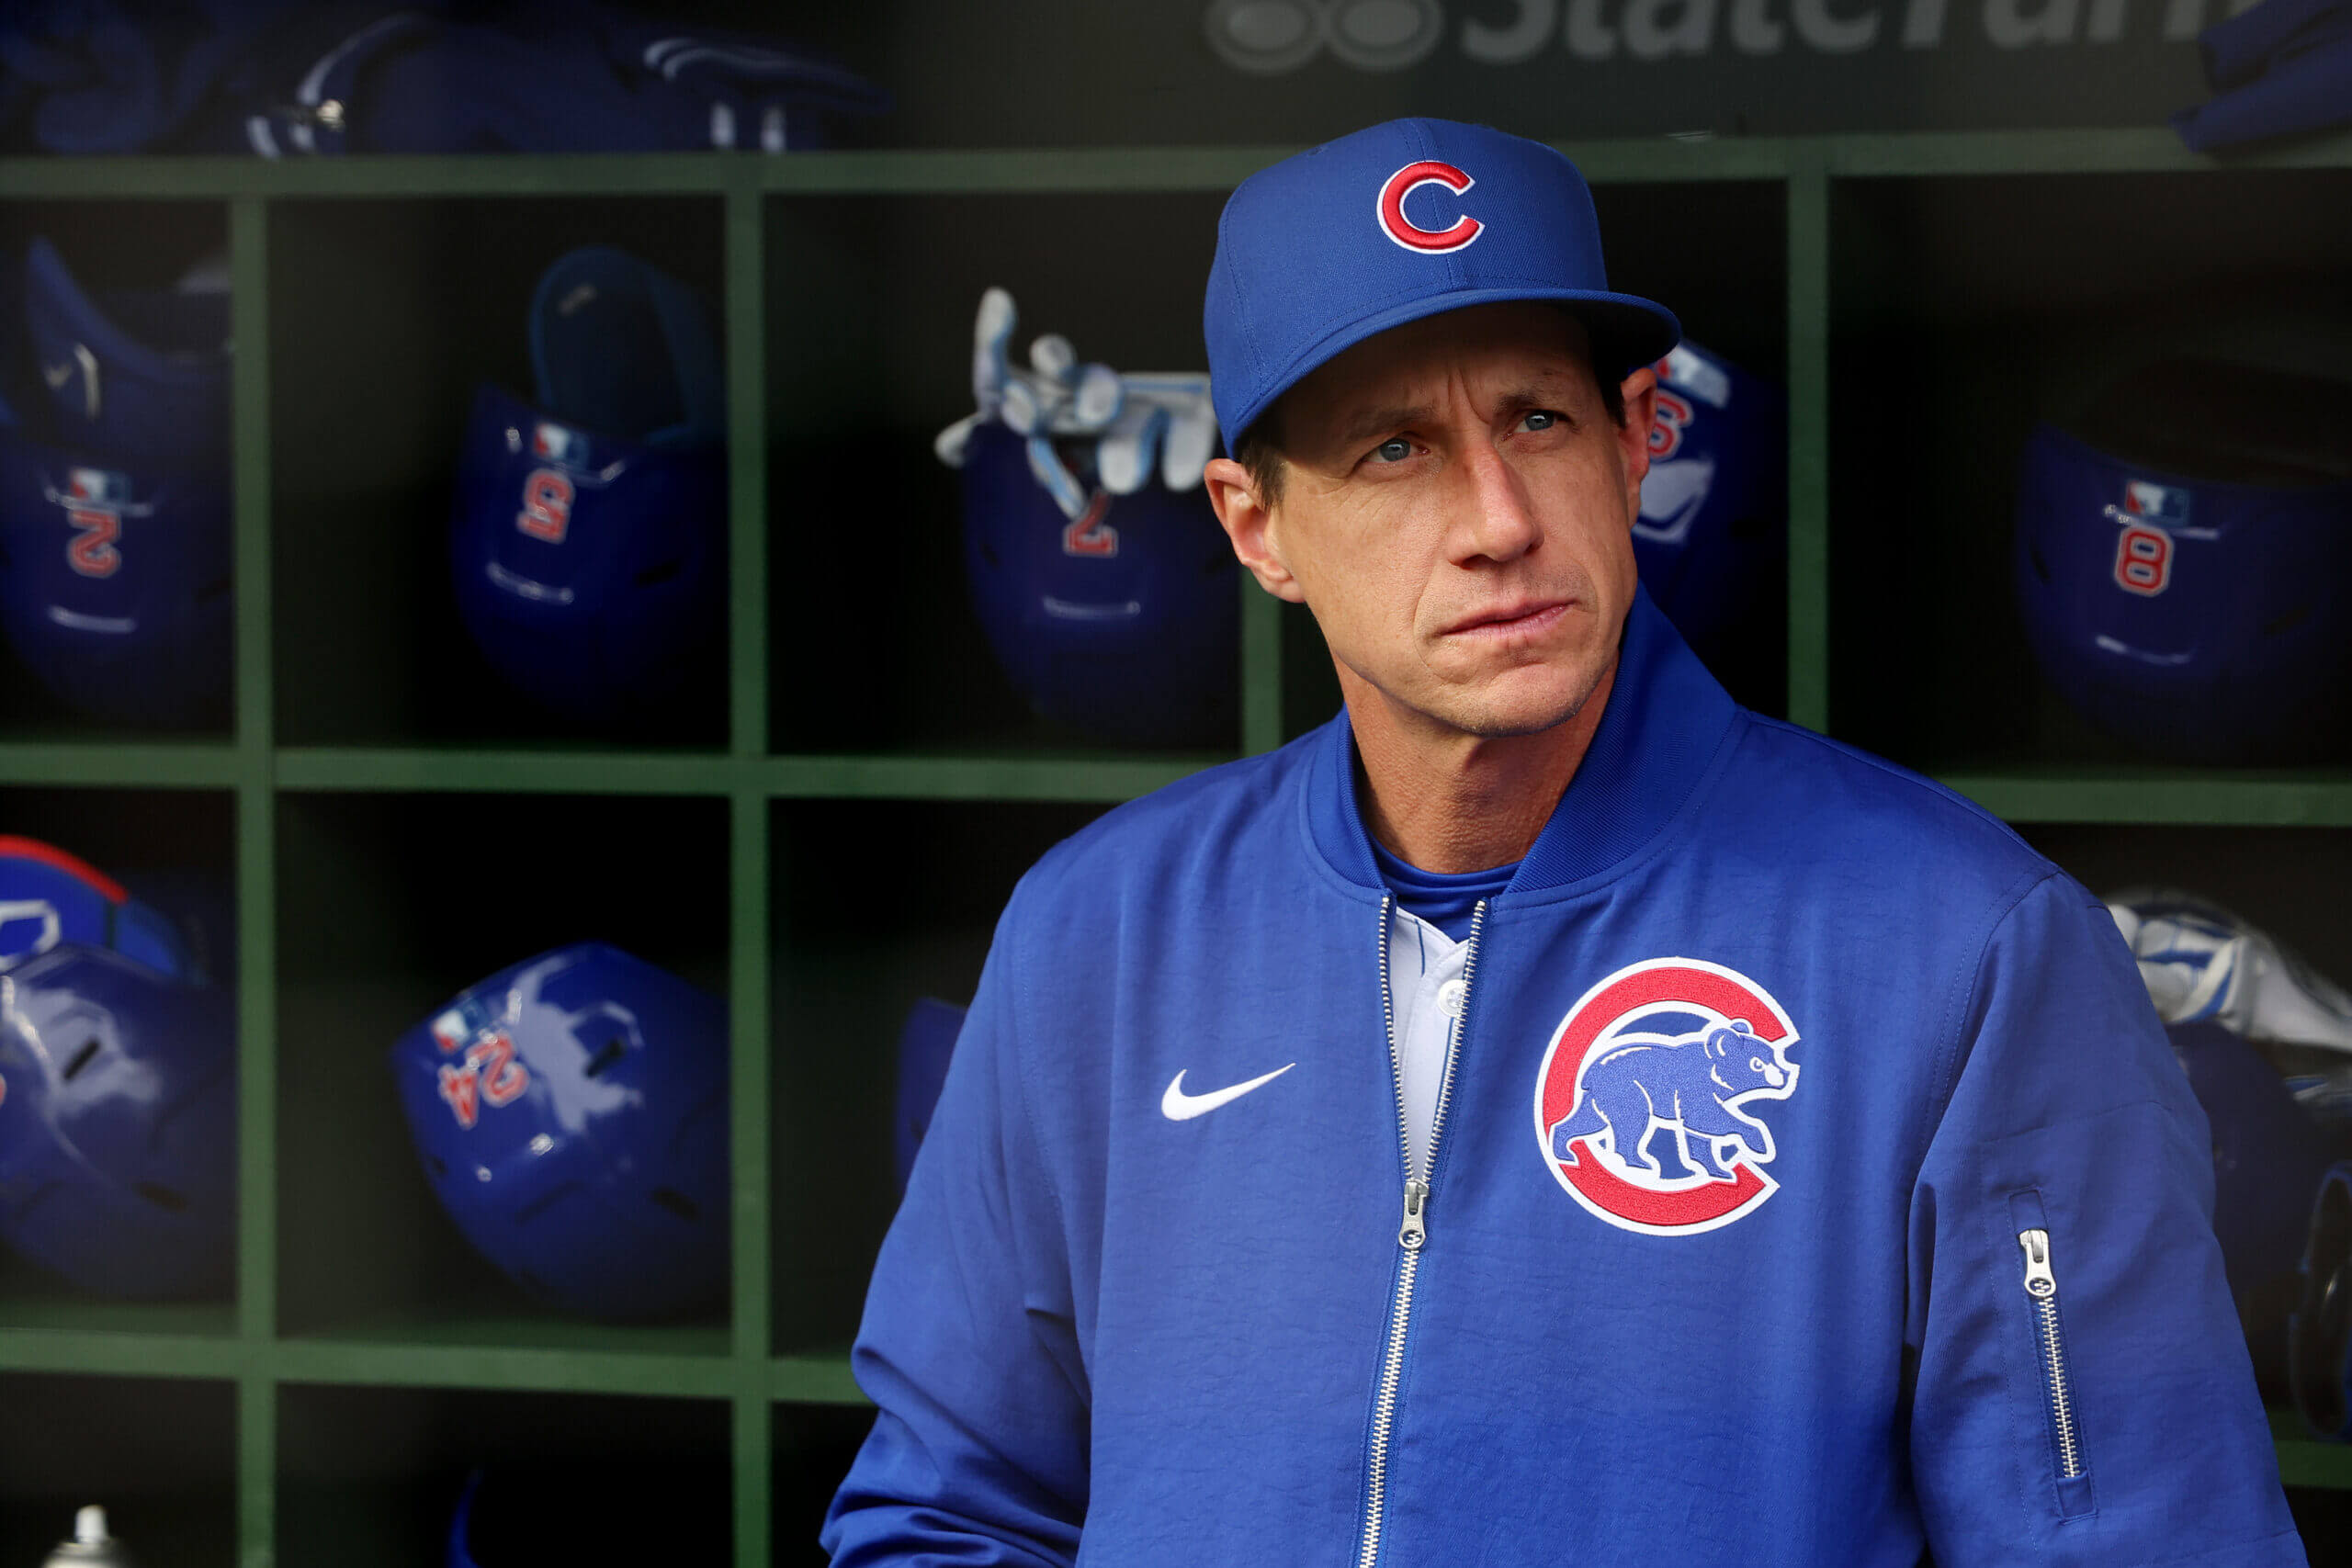 Five Cubs takeaways: On Craig Counsell’s breakup with the Brewers and move to Chicago